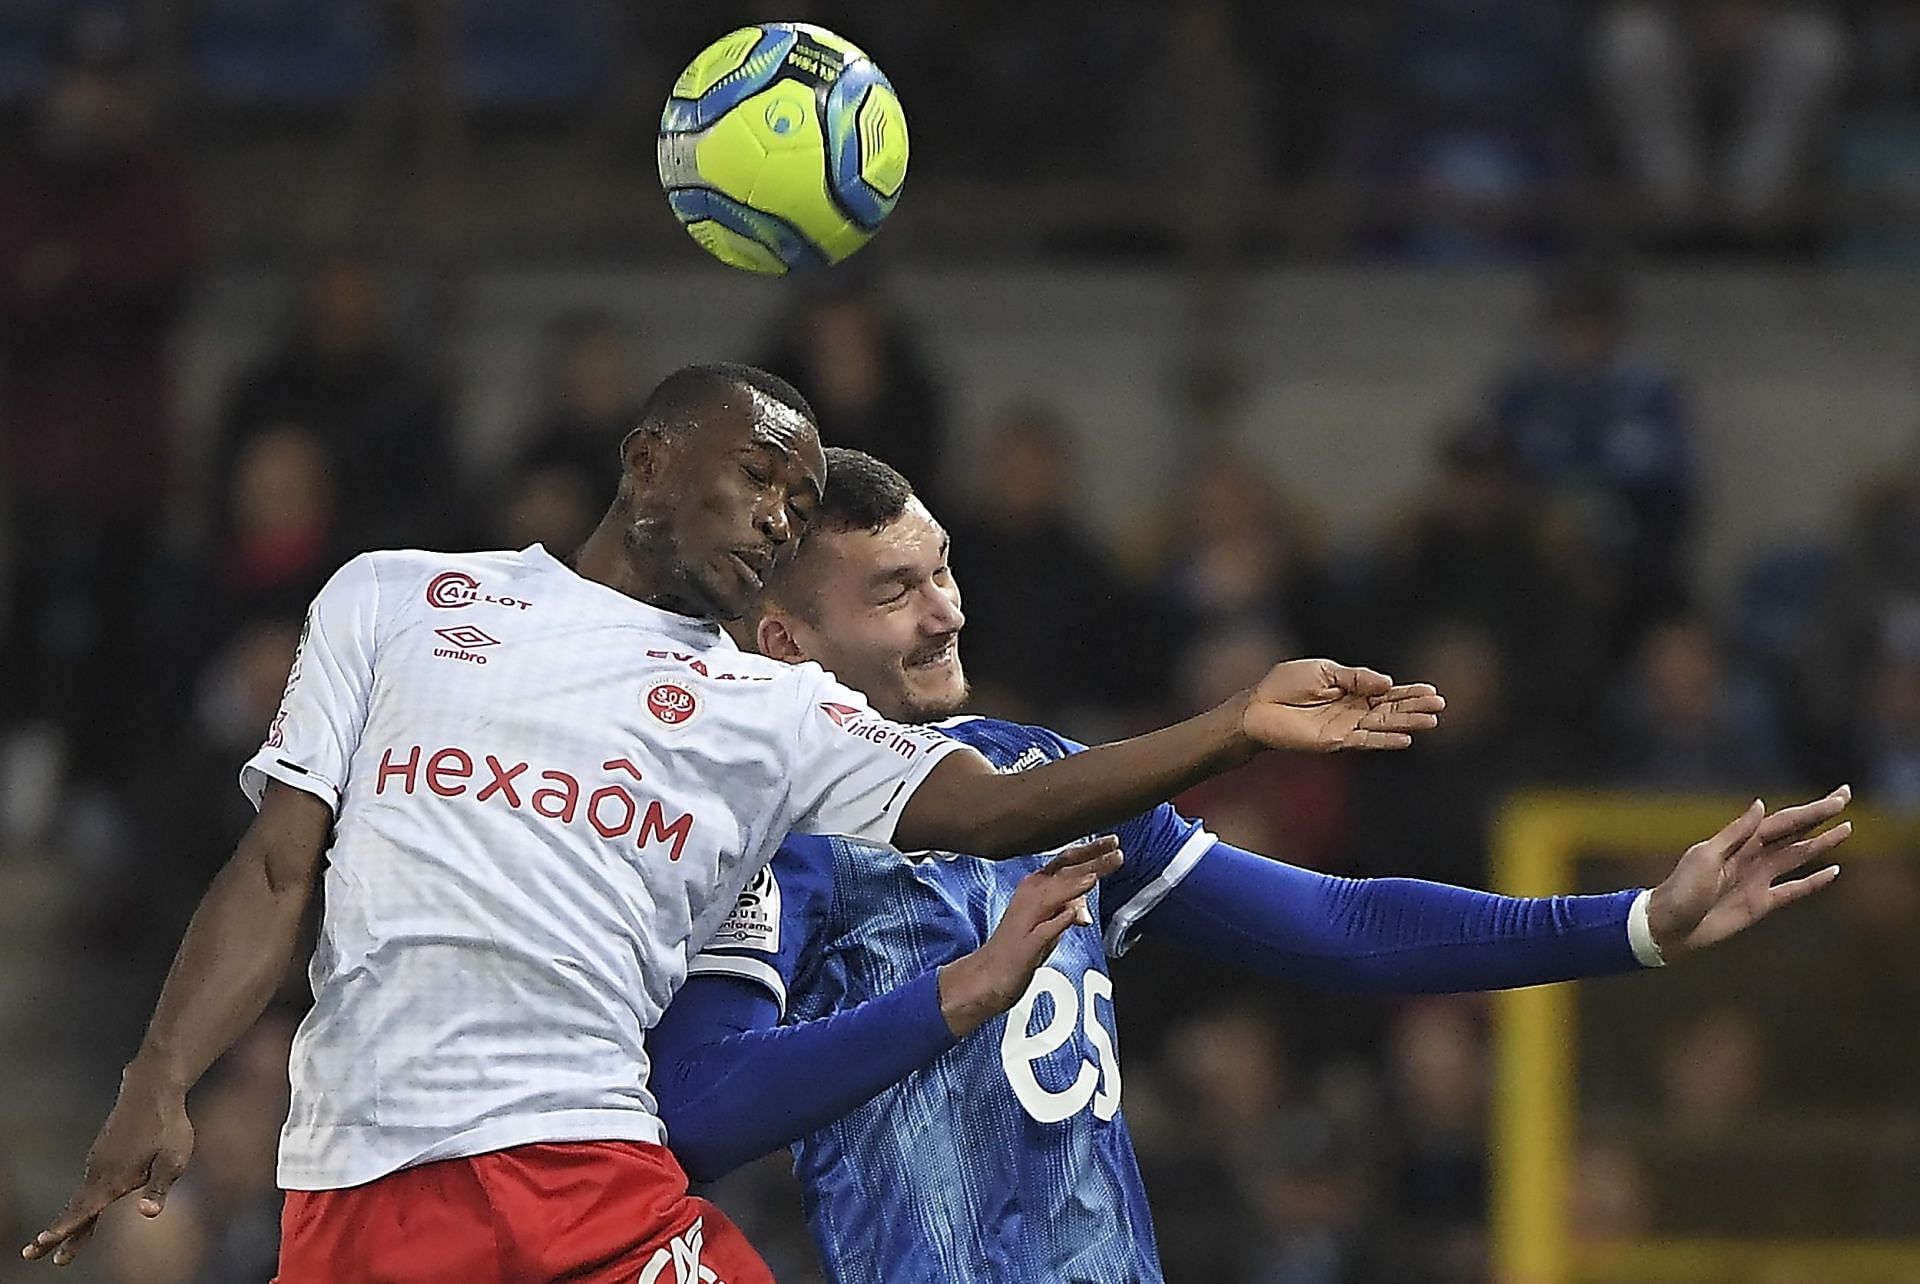 Strasbourg will face Reims in their upcoming Ligue 1 fixture on Sunday